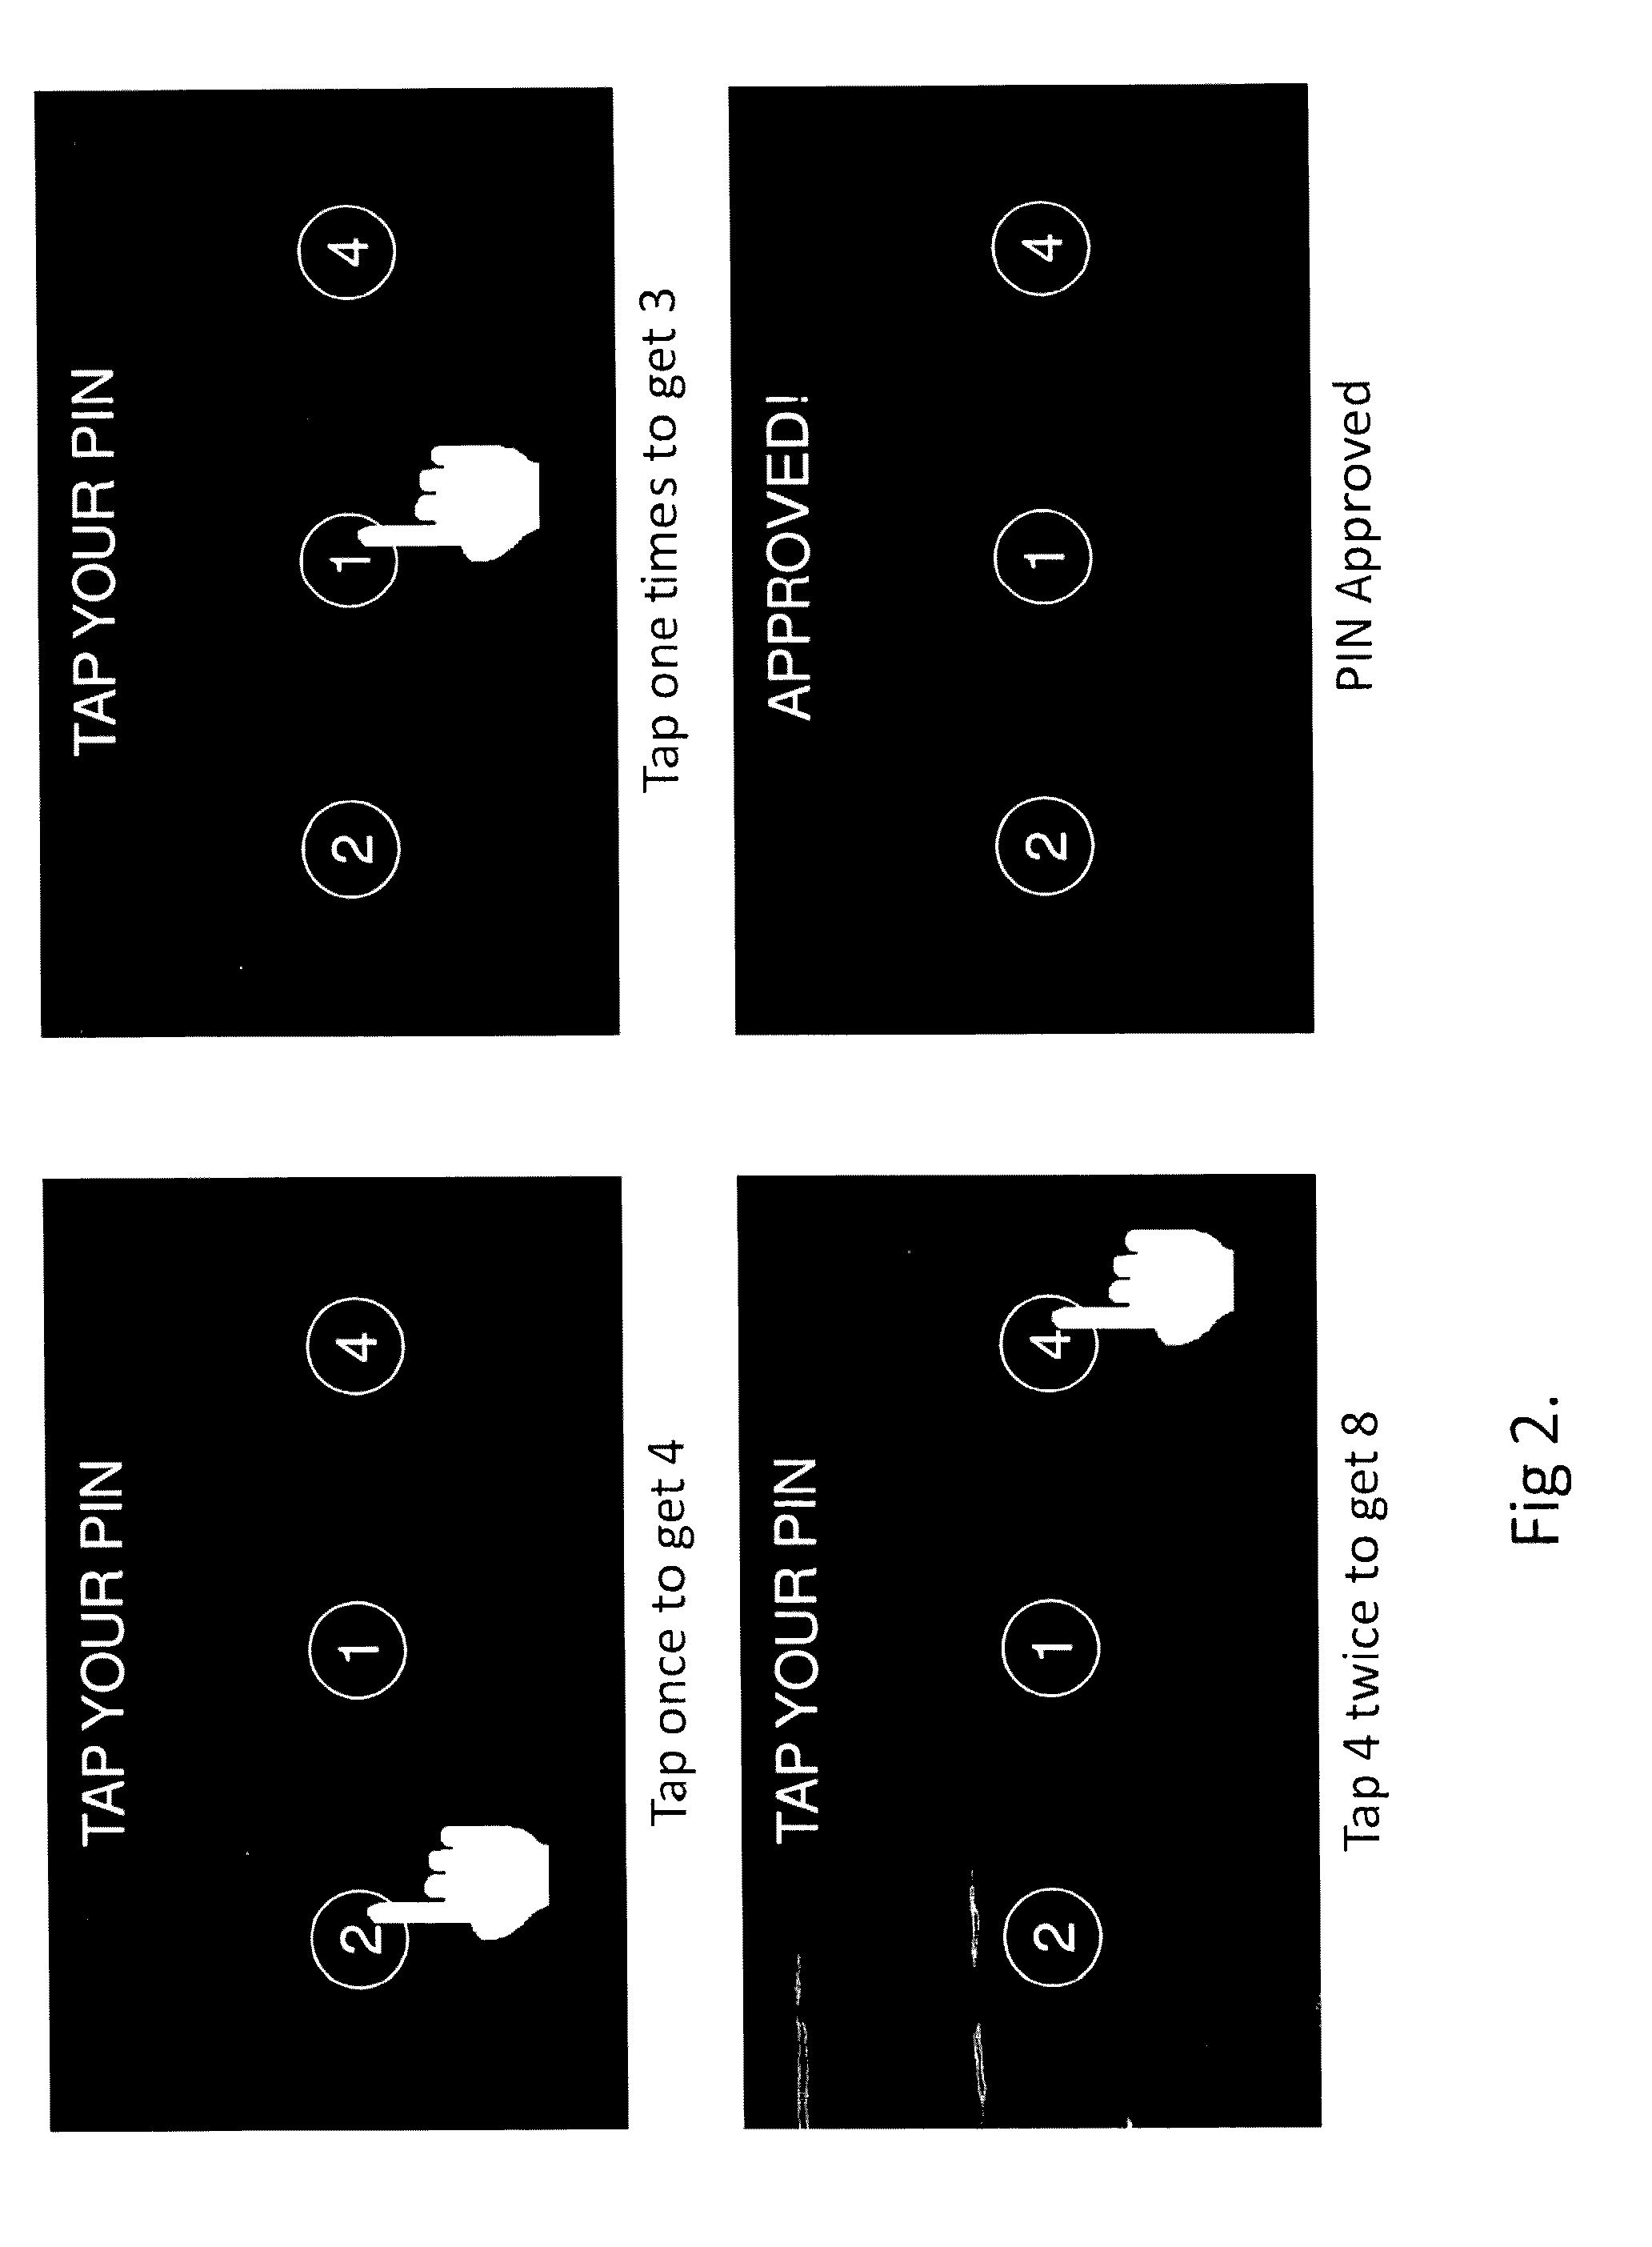 Methods and Systems Related to Multi-Factor, MultiDimensional, Mathematical, Hidden and Motion Security Pins